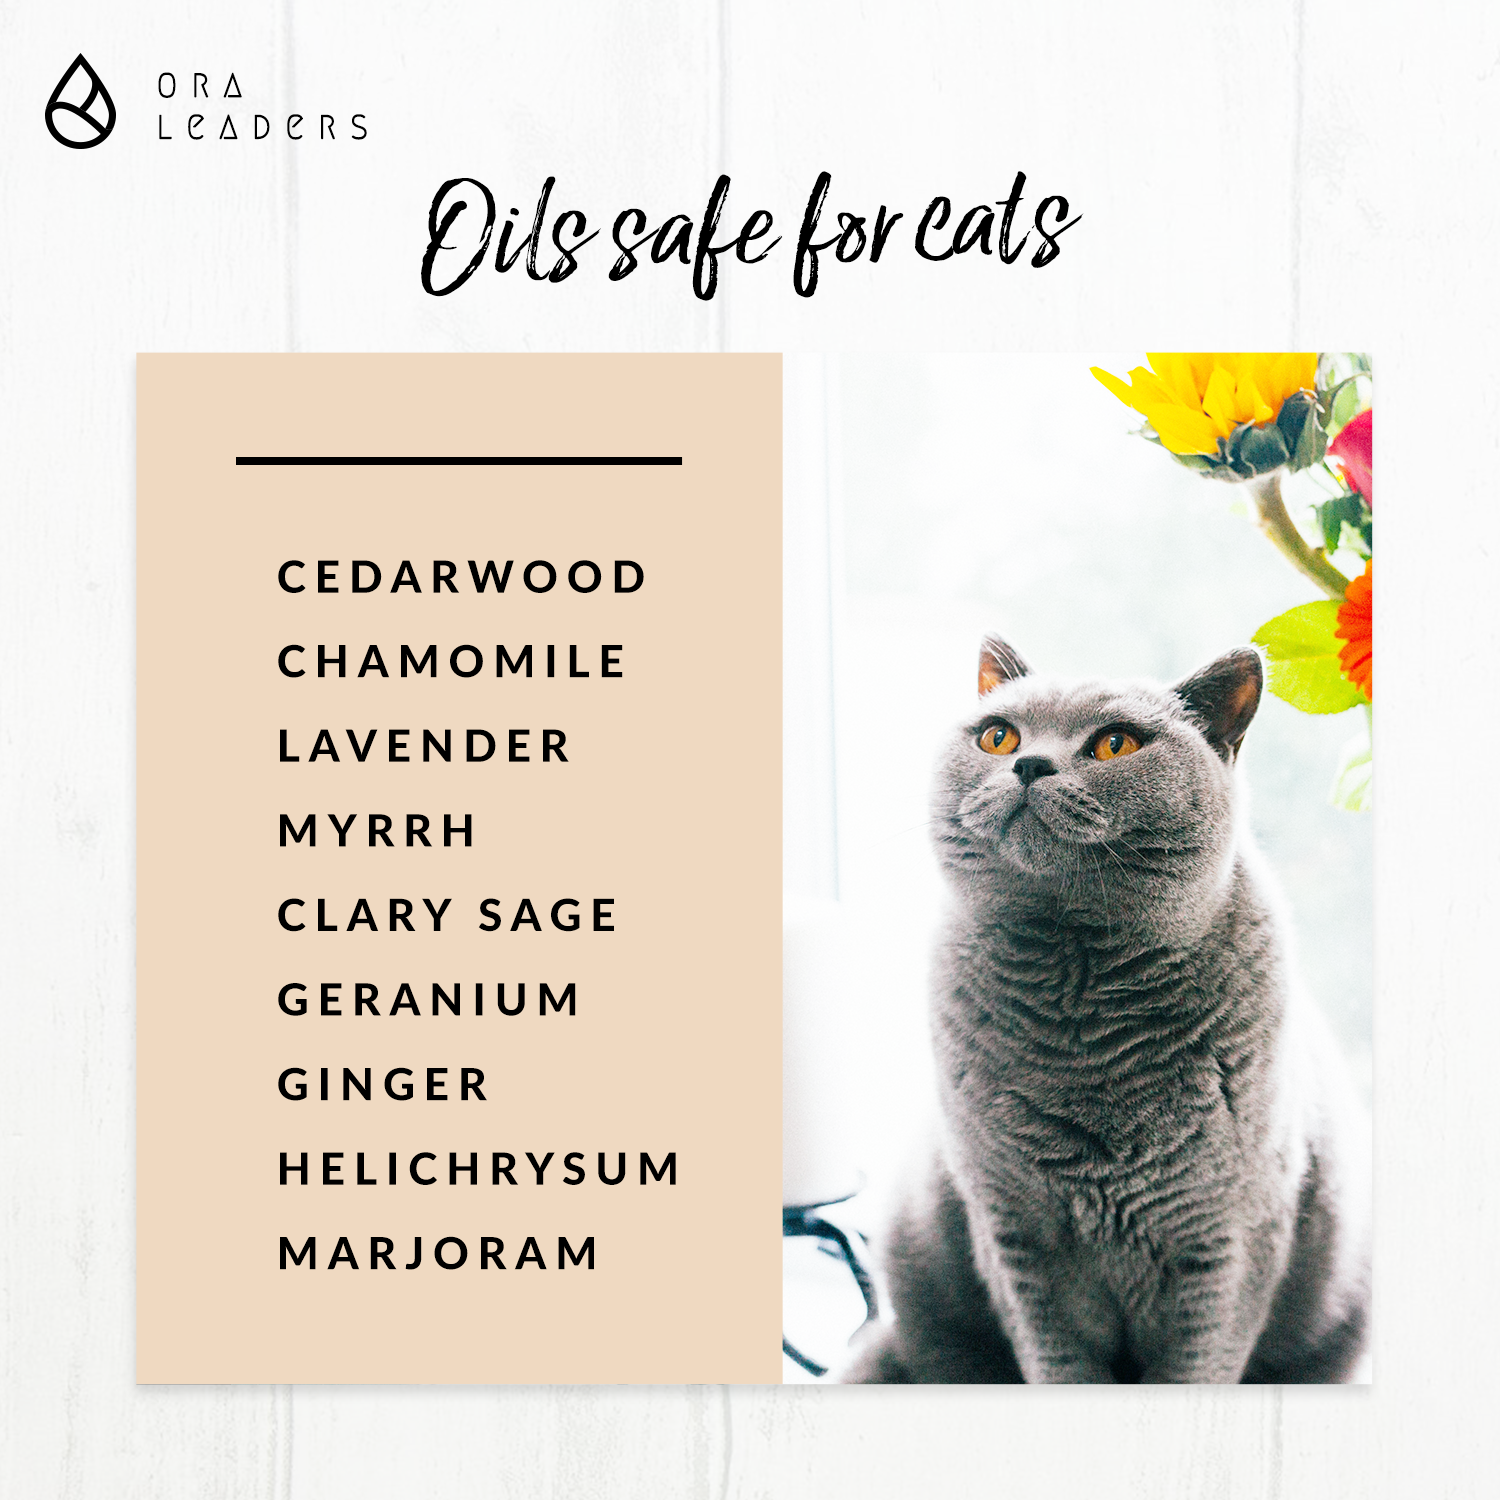 Oils safe for cats